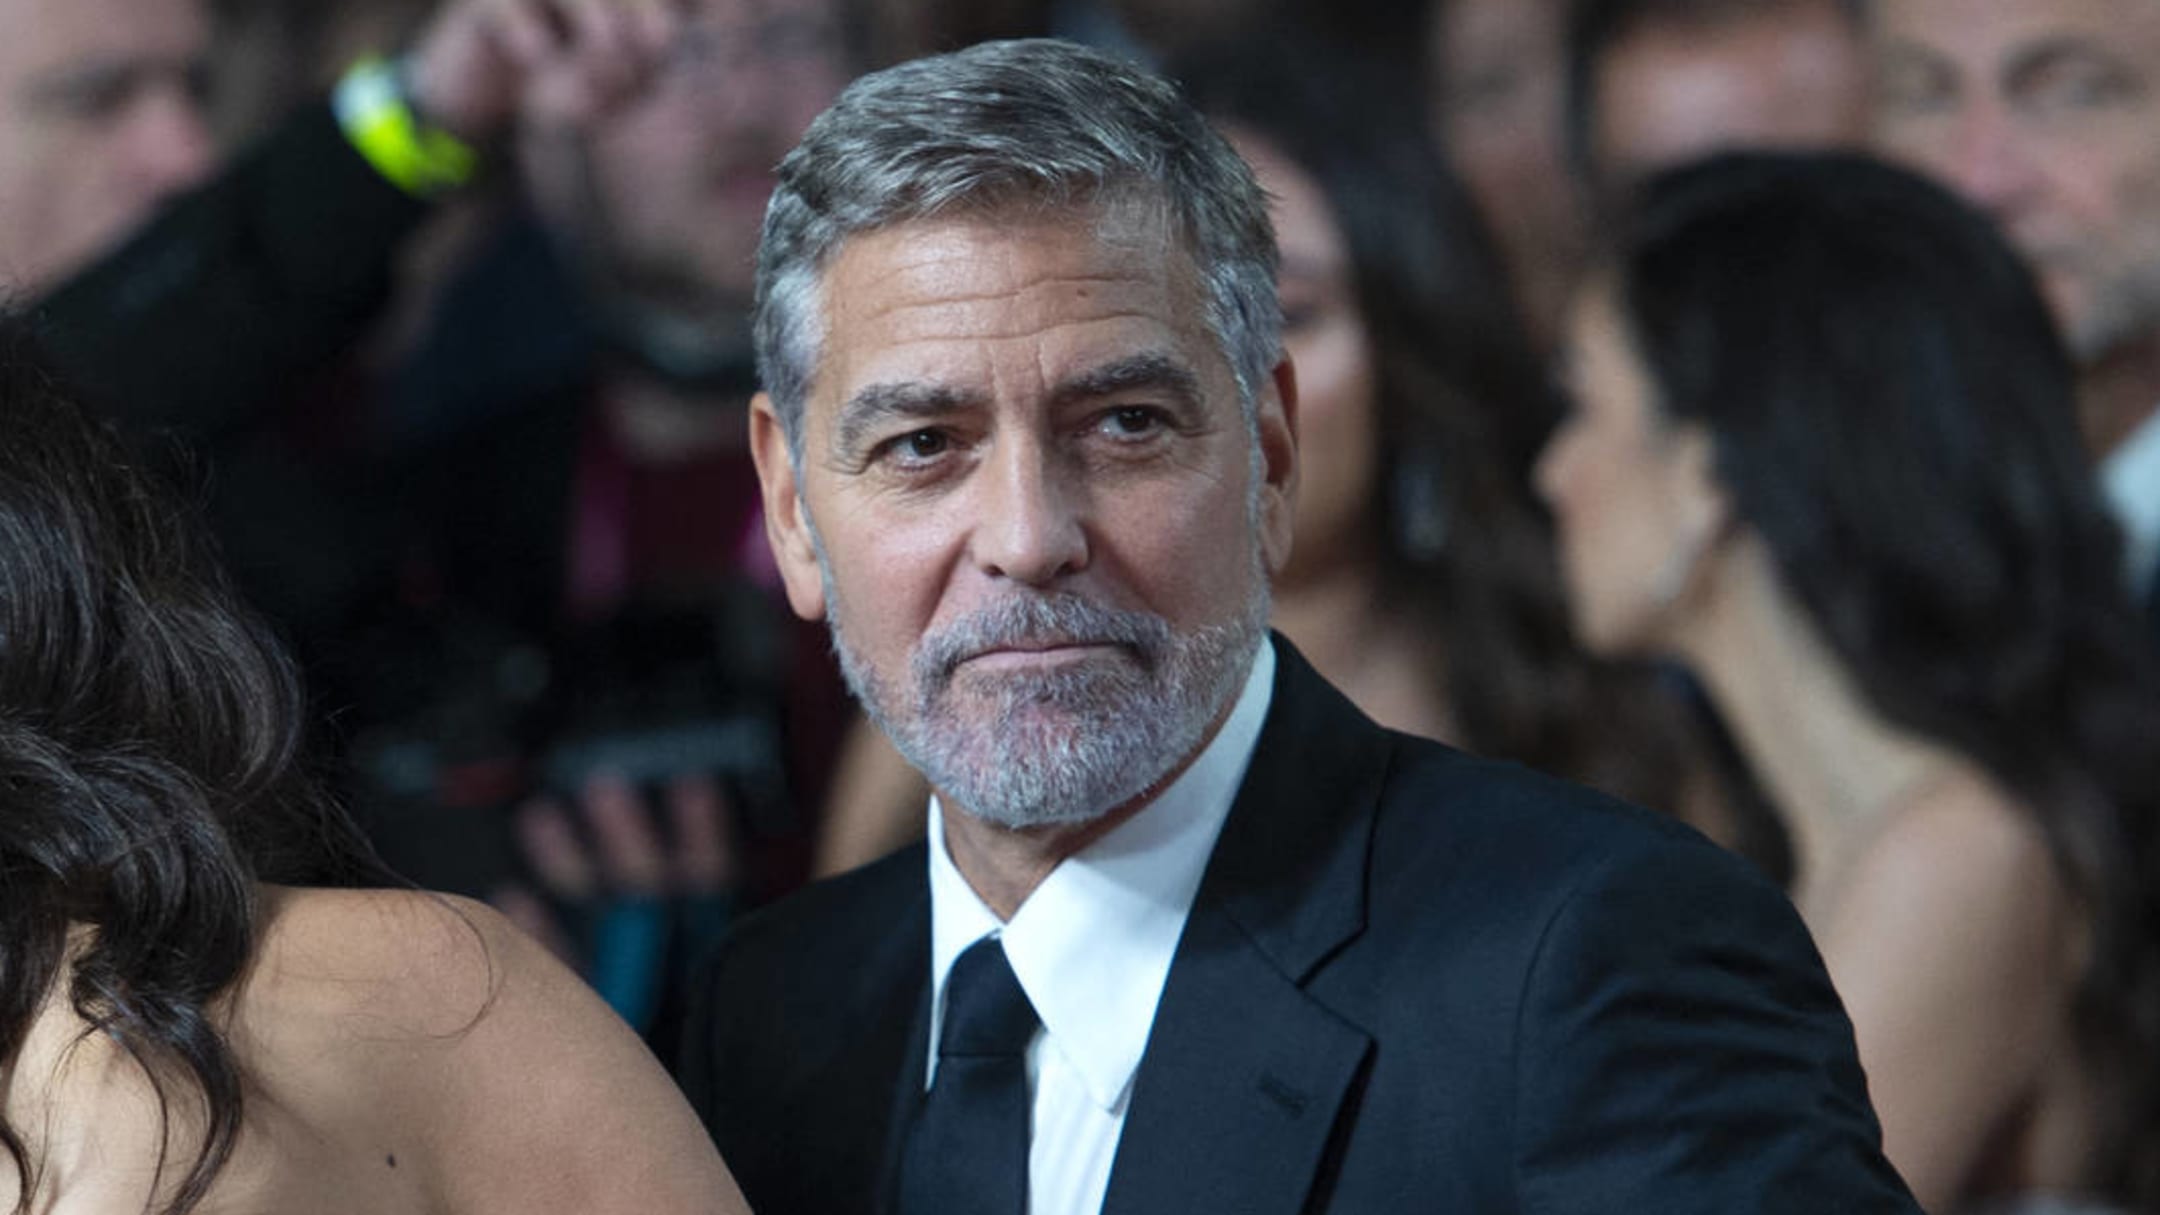 Julia Roberts & George Clooney's 'Ticket to Paradise' briefly in town Reel  Chicago News